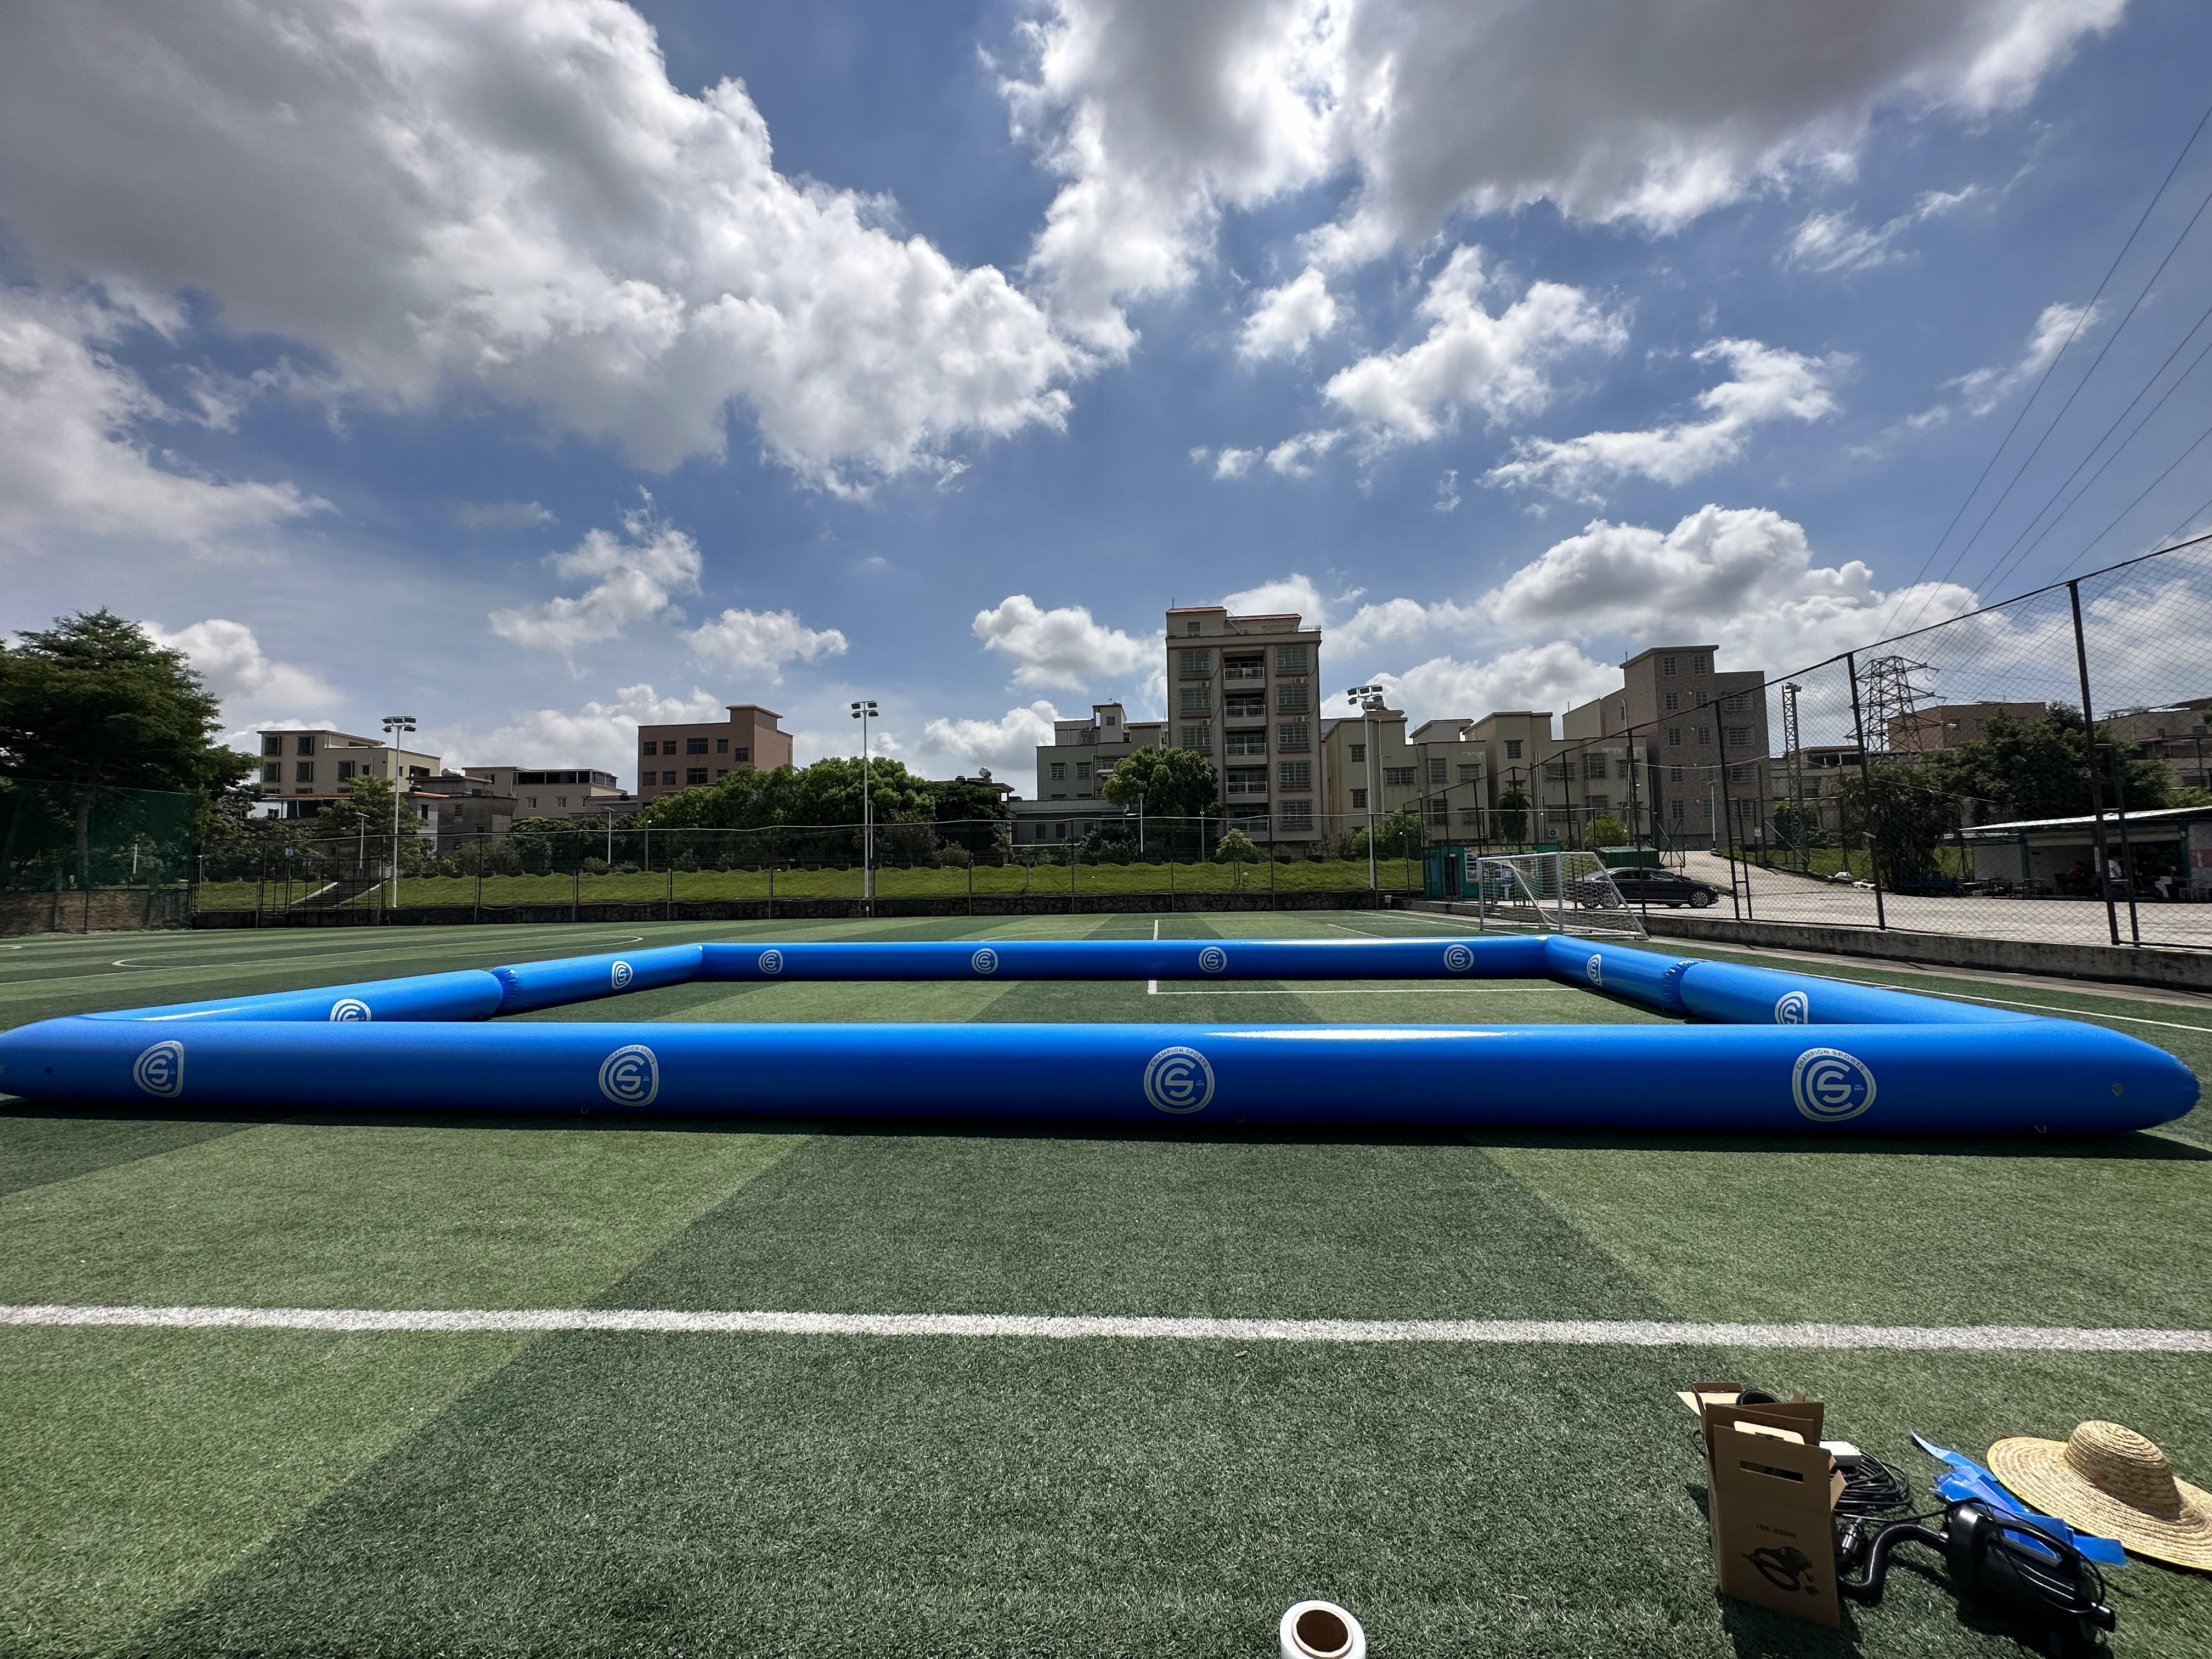 Inflatable Soccer Pitch arena